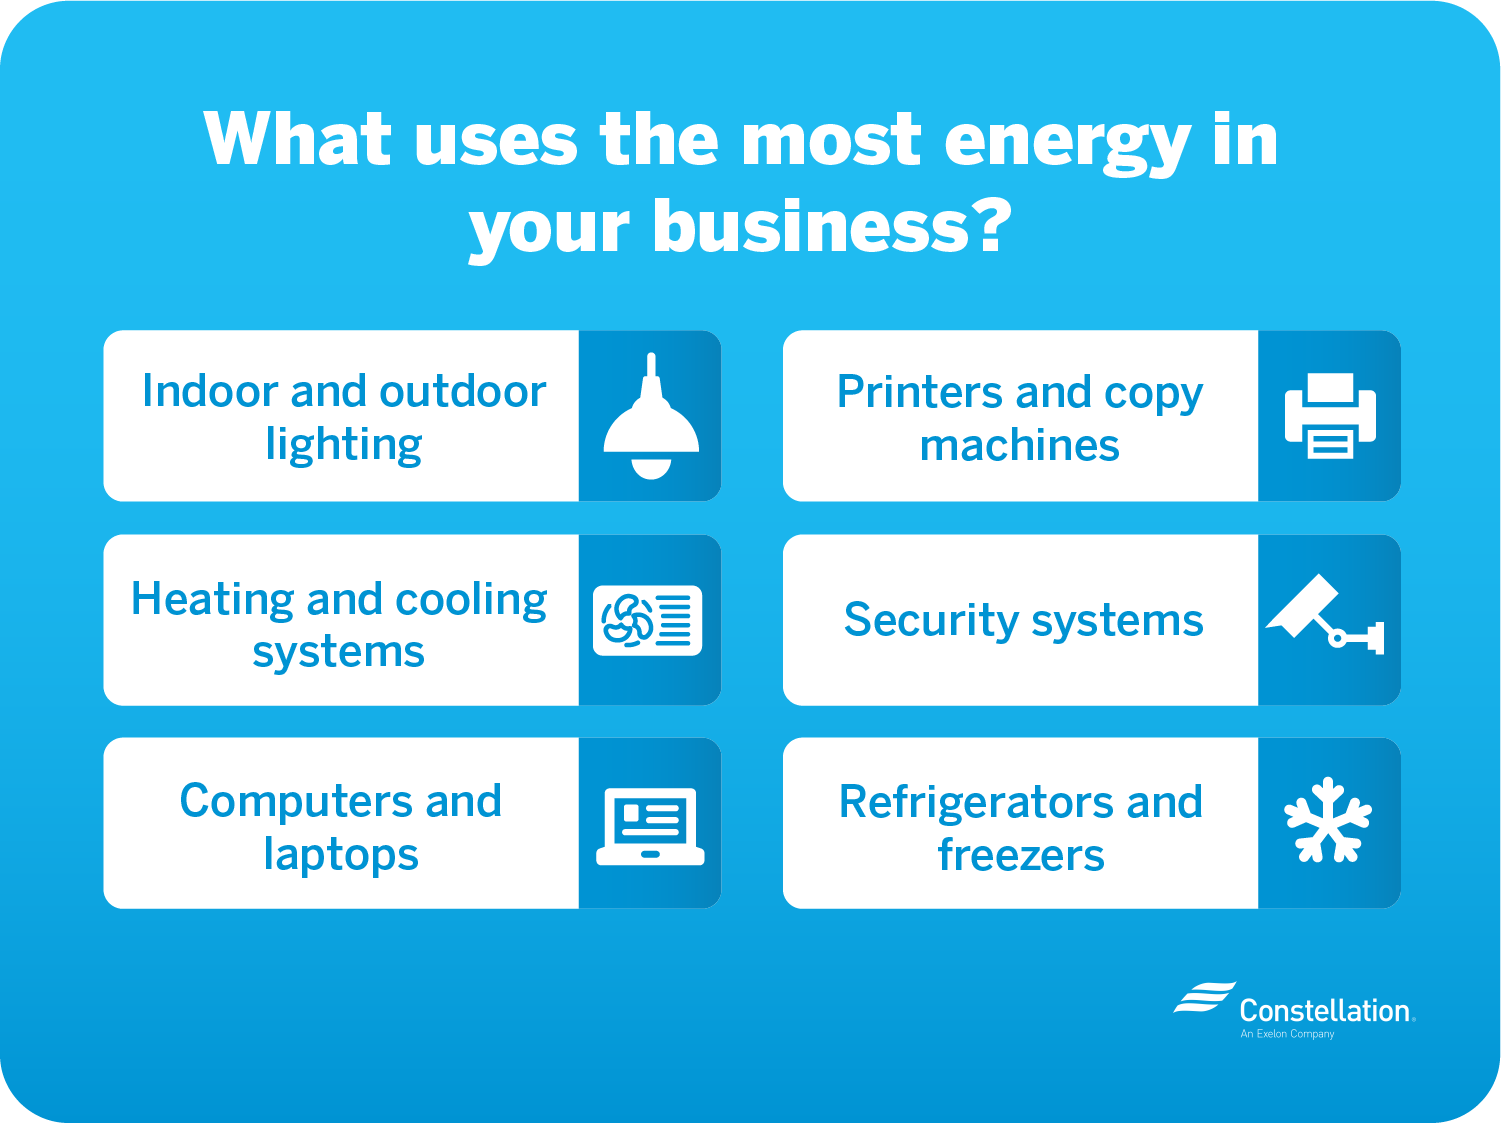 What uses the most energy in your business